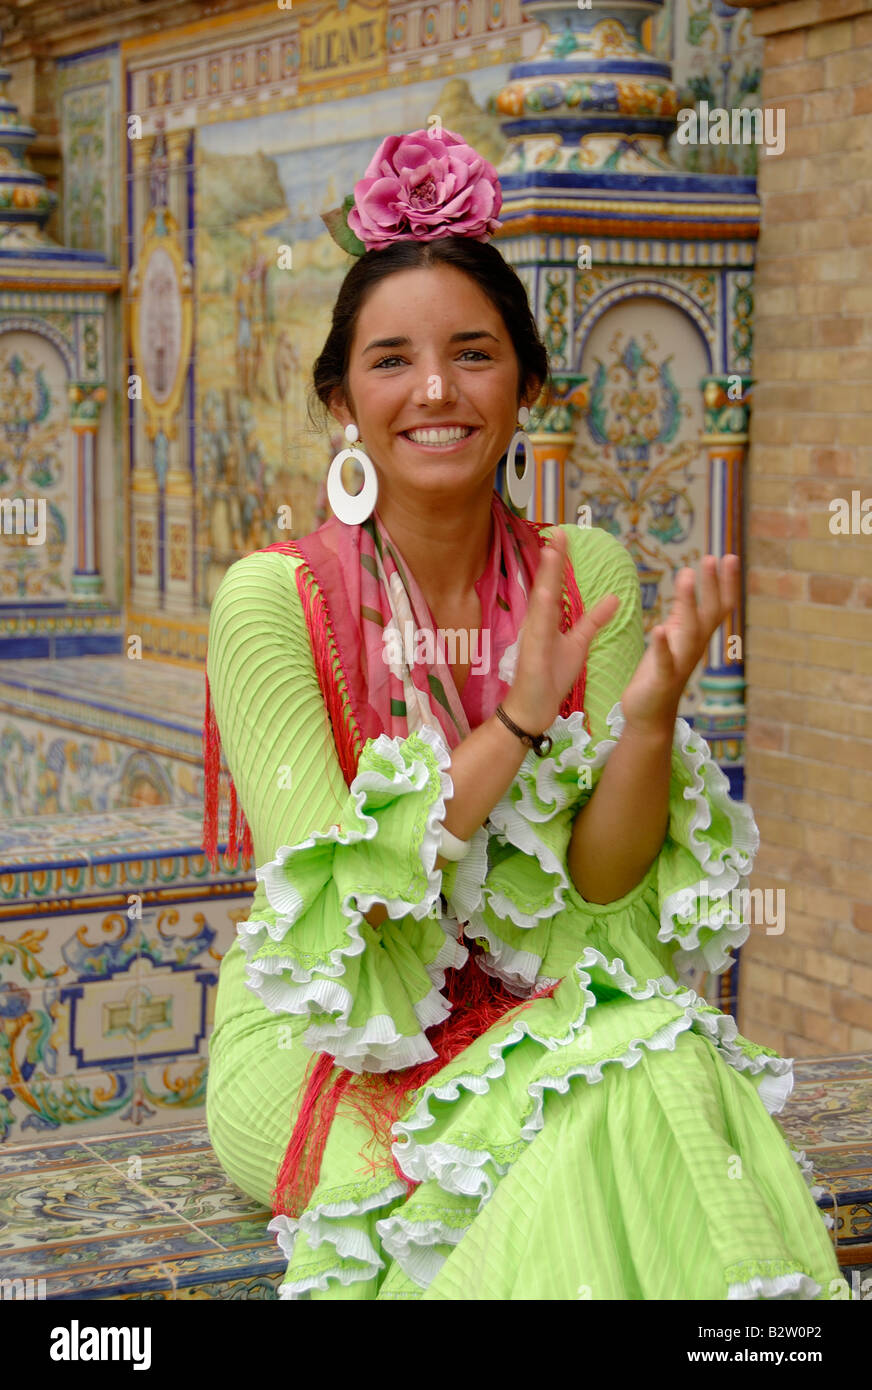 Seville fair Feria de Sevilla, young girl in traditional dress smiling and clapping Stock Photo